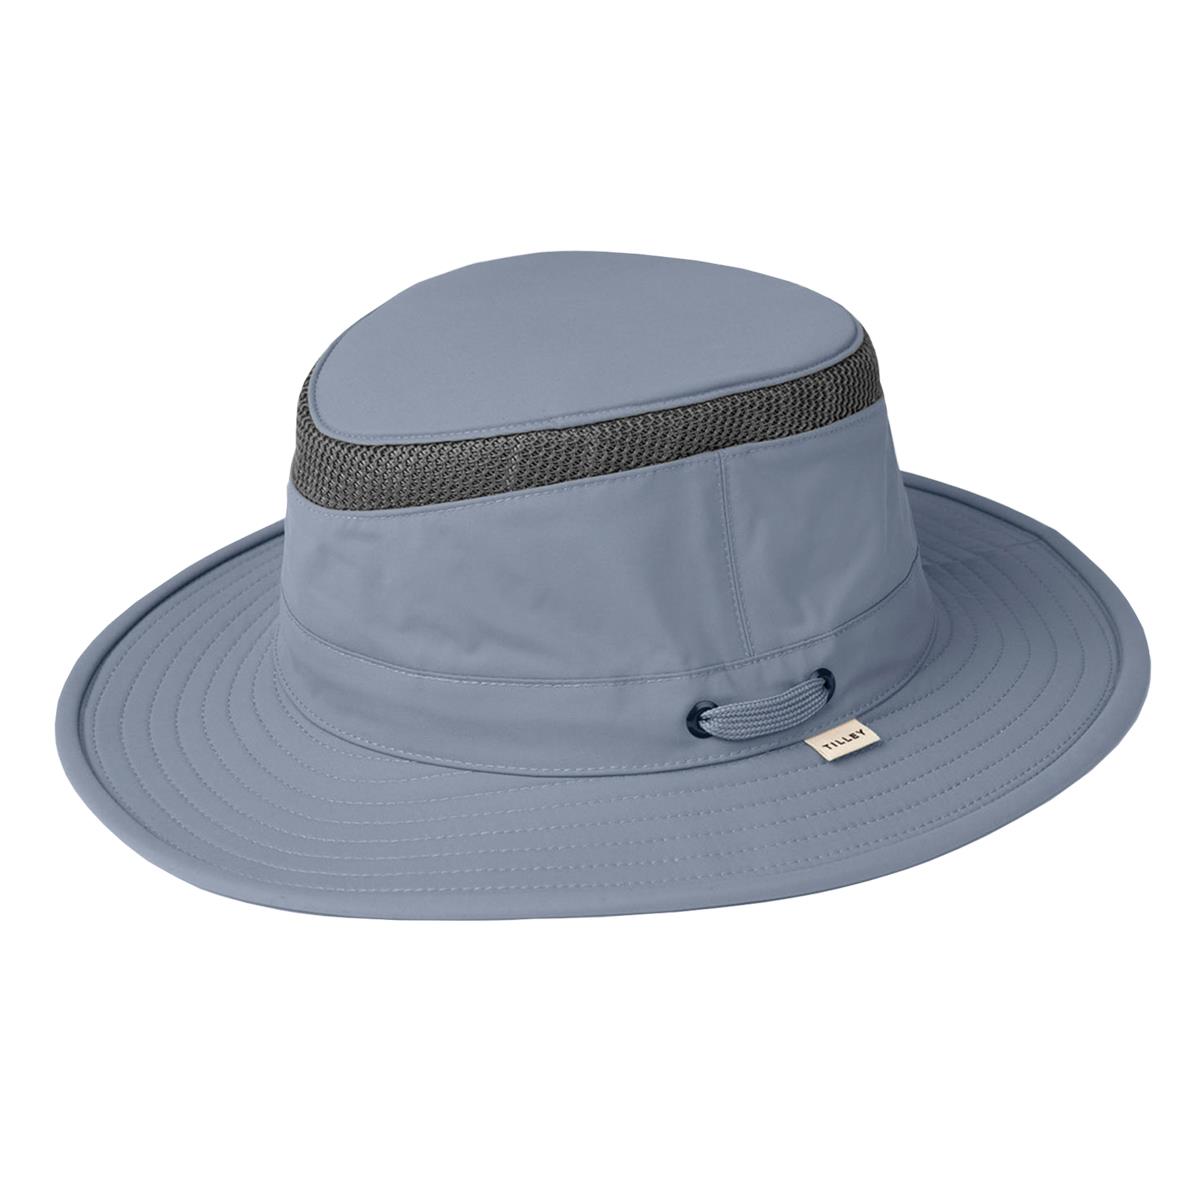 What is the PM ref. number for the Tilley LTM5 hat?